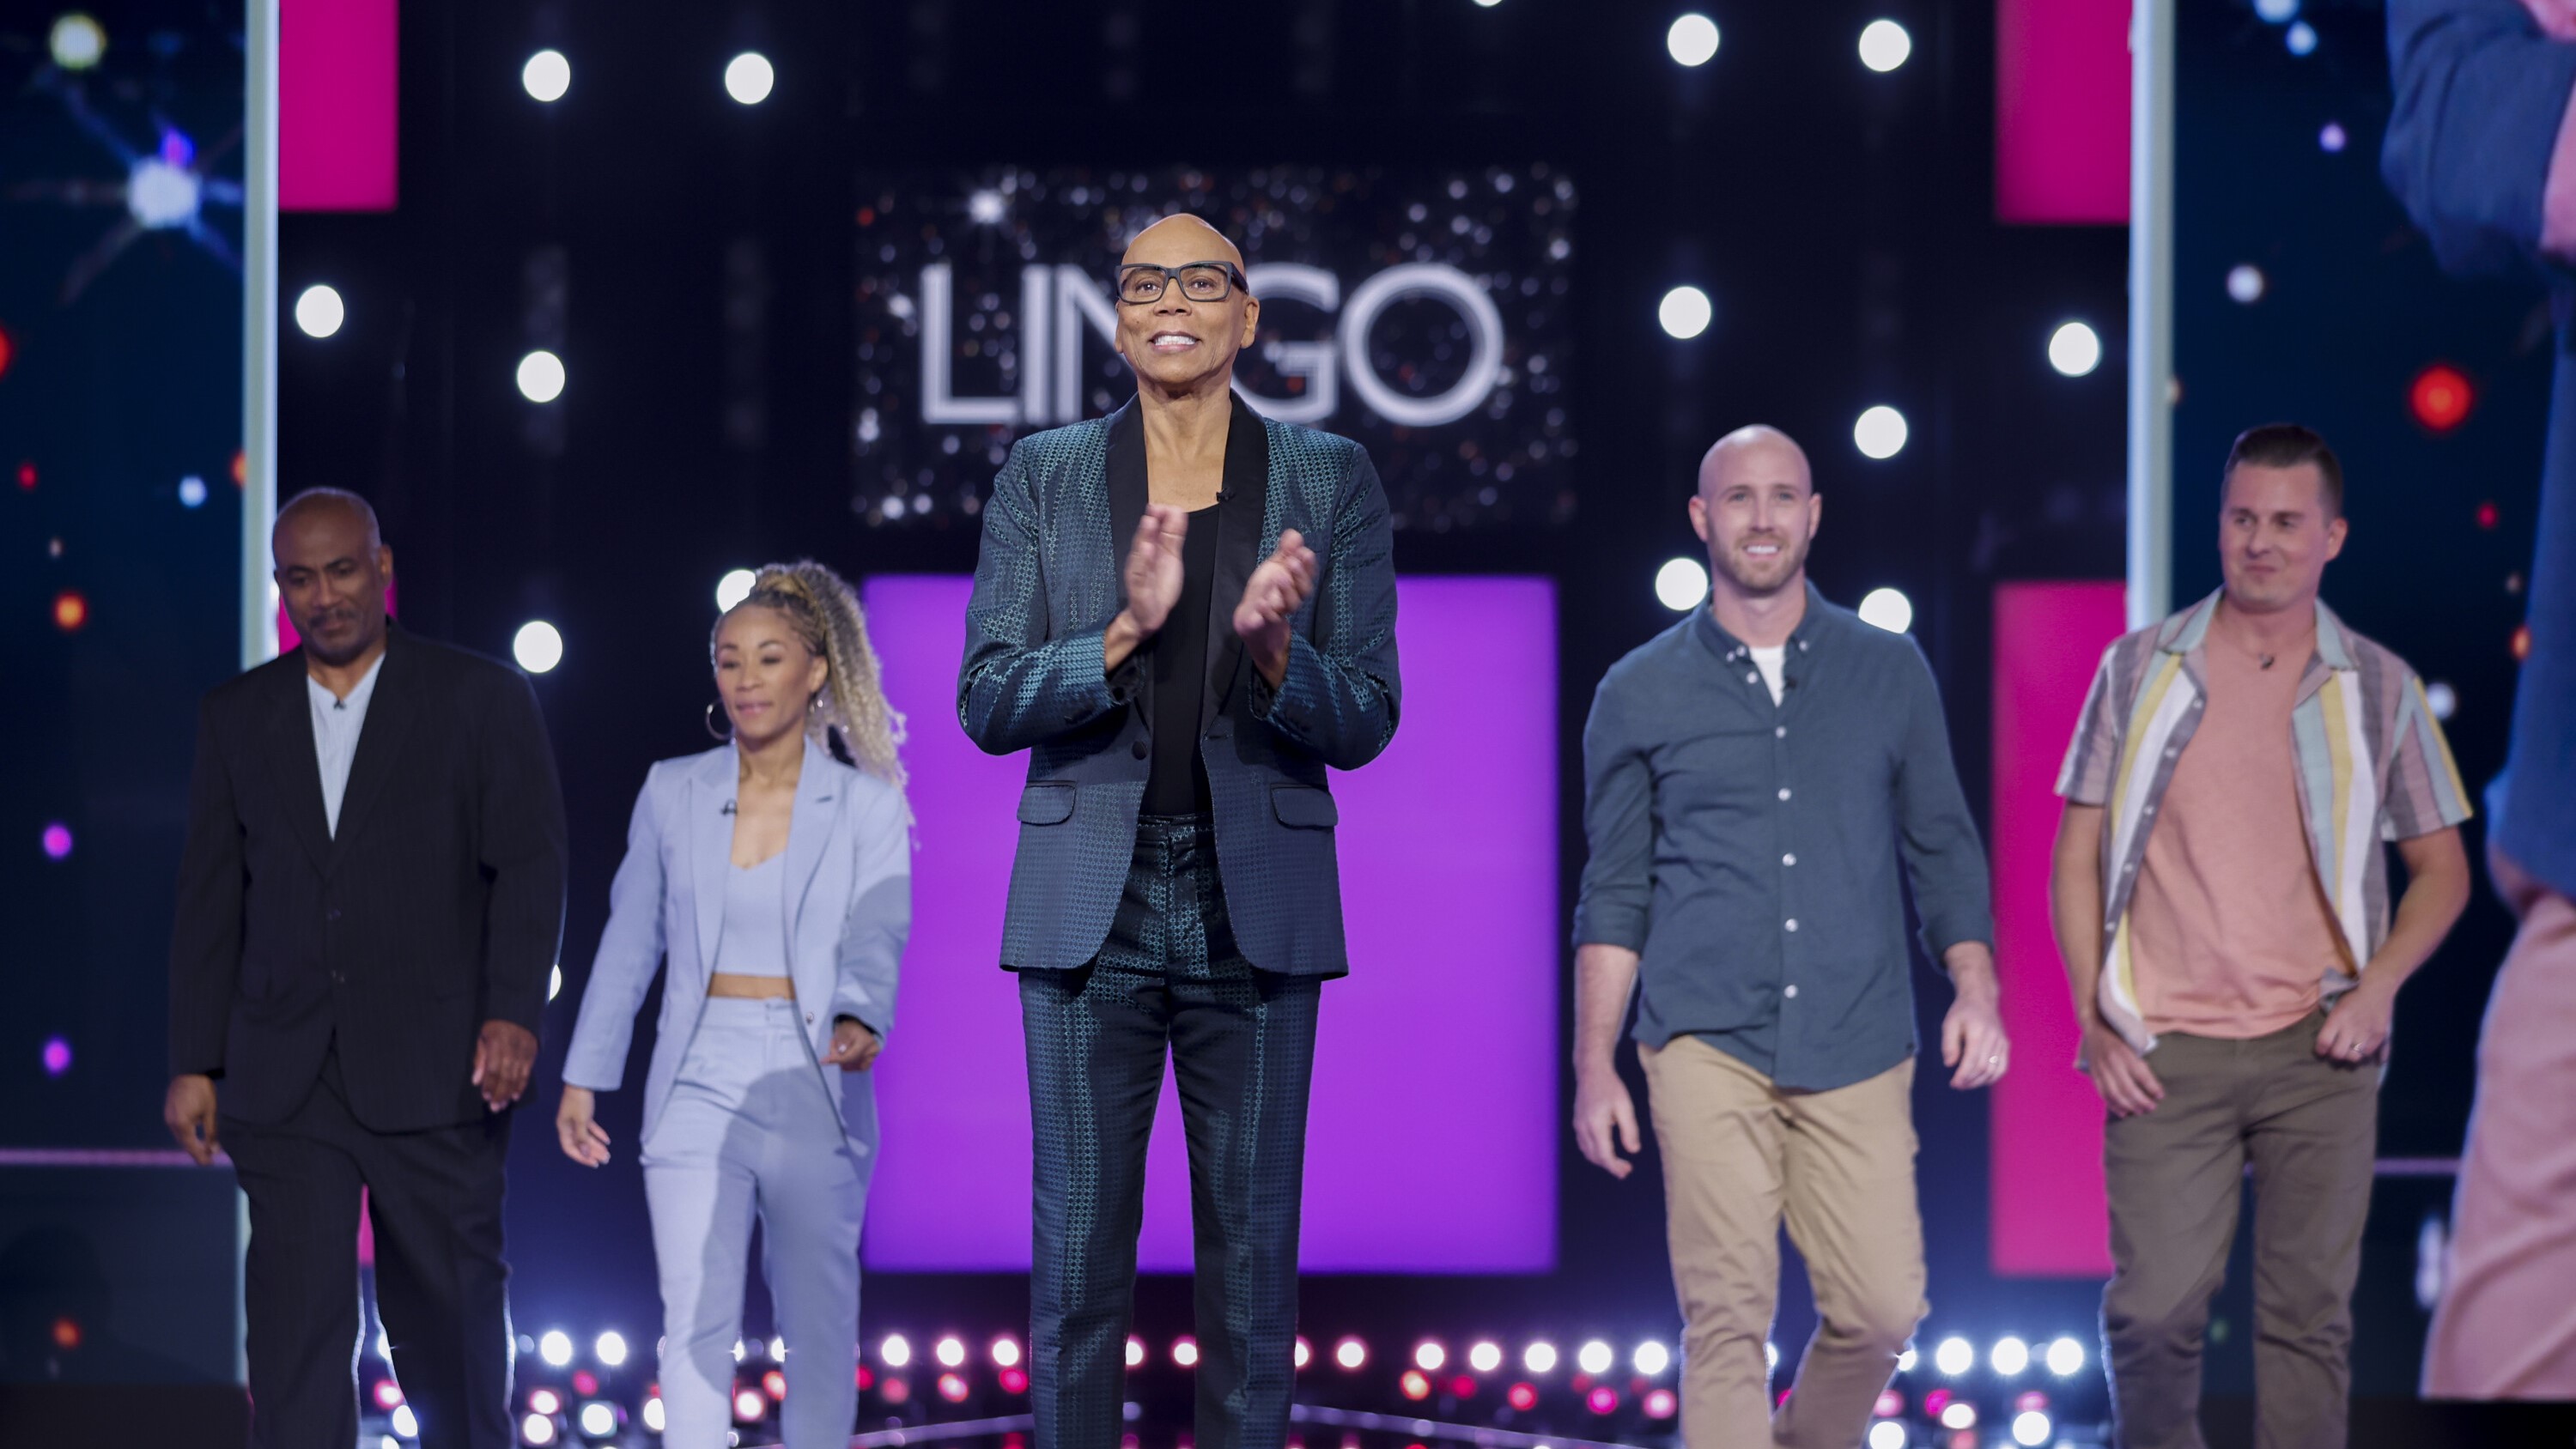 Lingo game show everything you need to know What to Watch